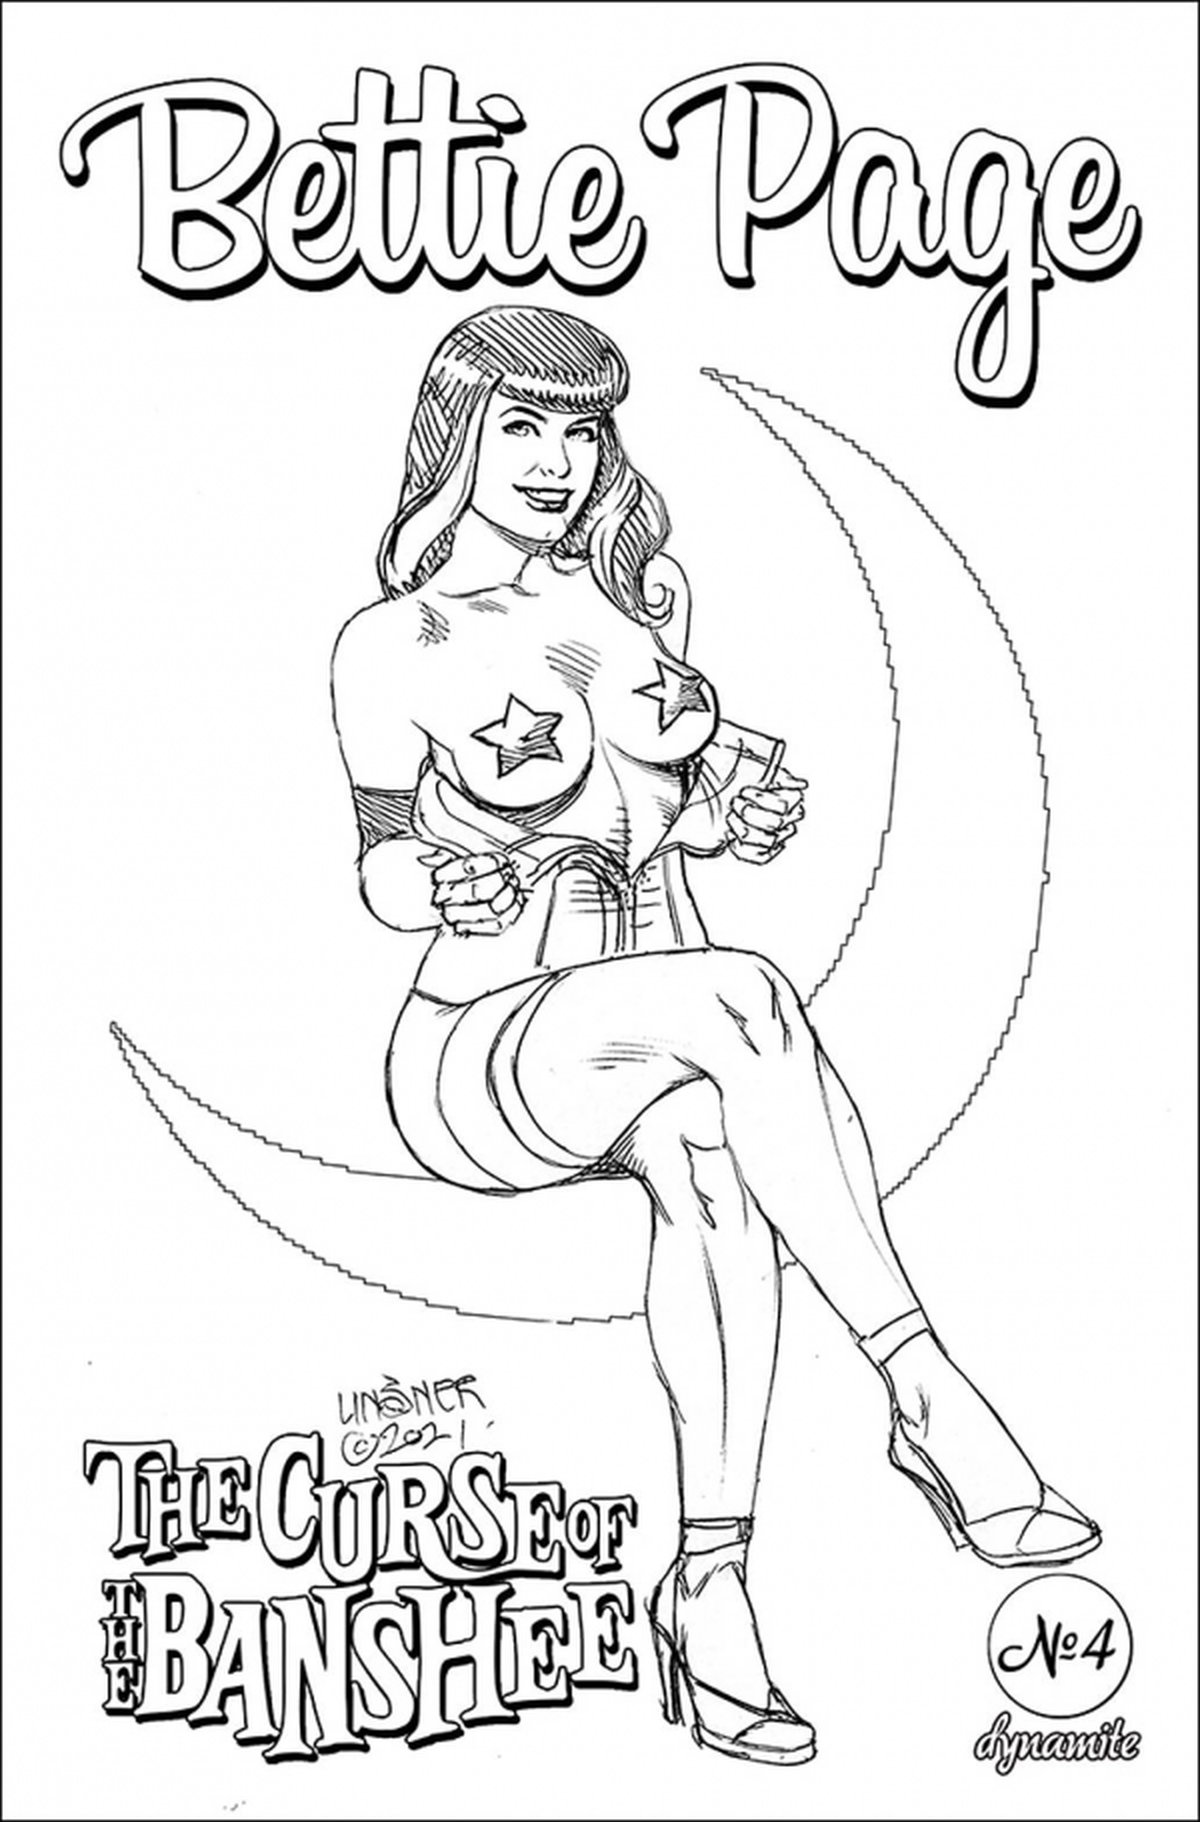 Bettie Page: The Curse of the Banshee #4